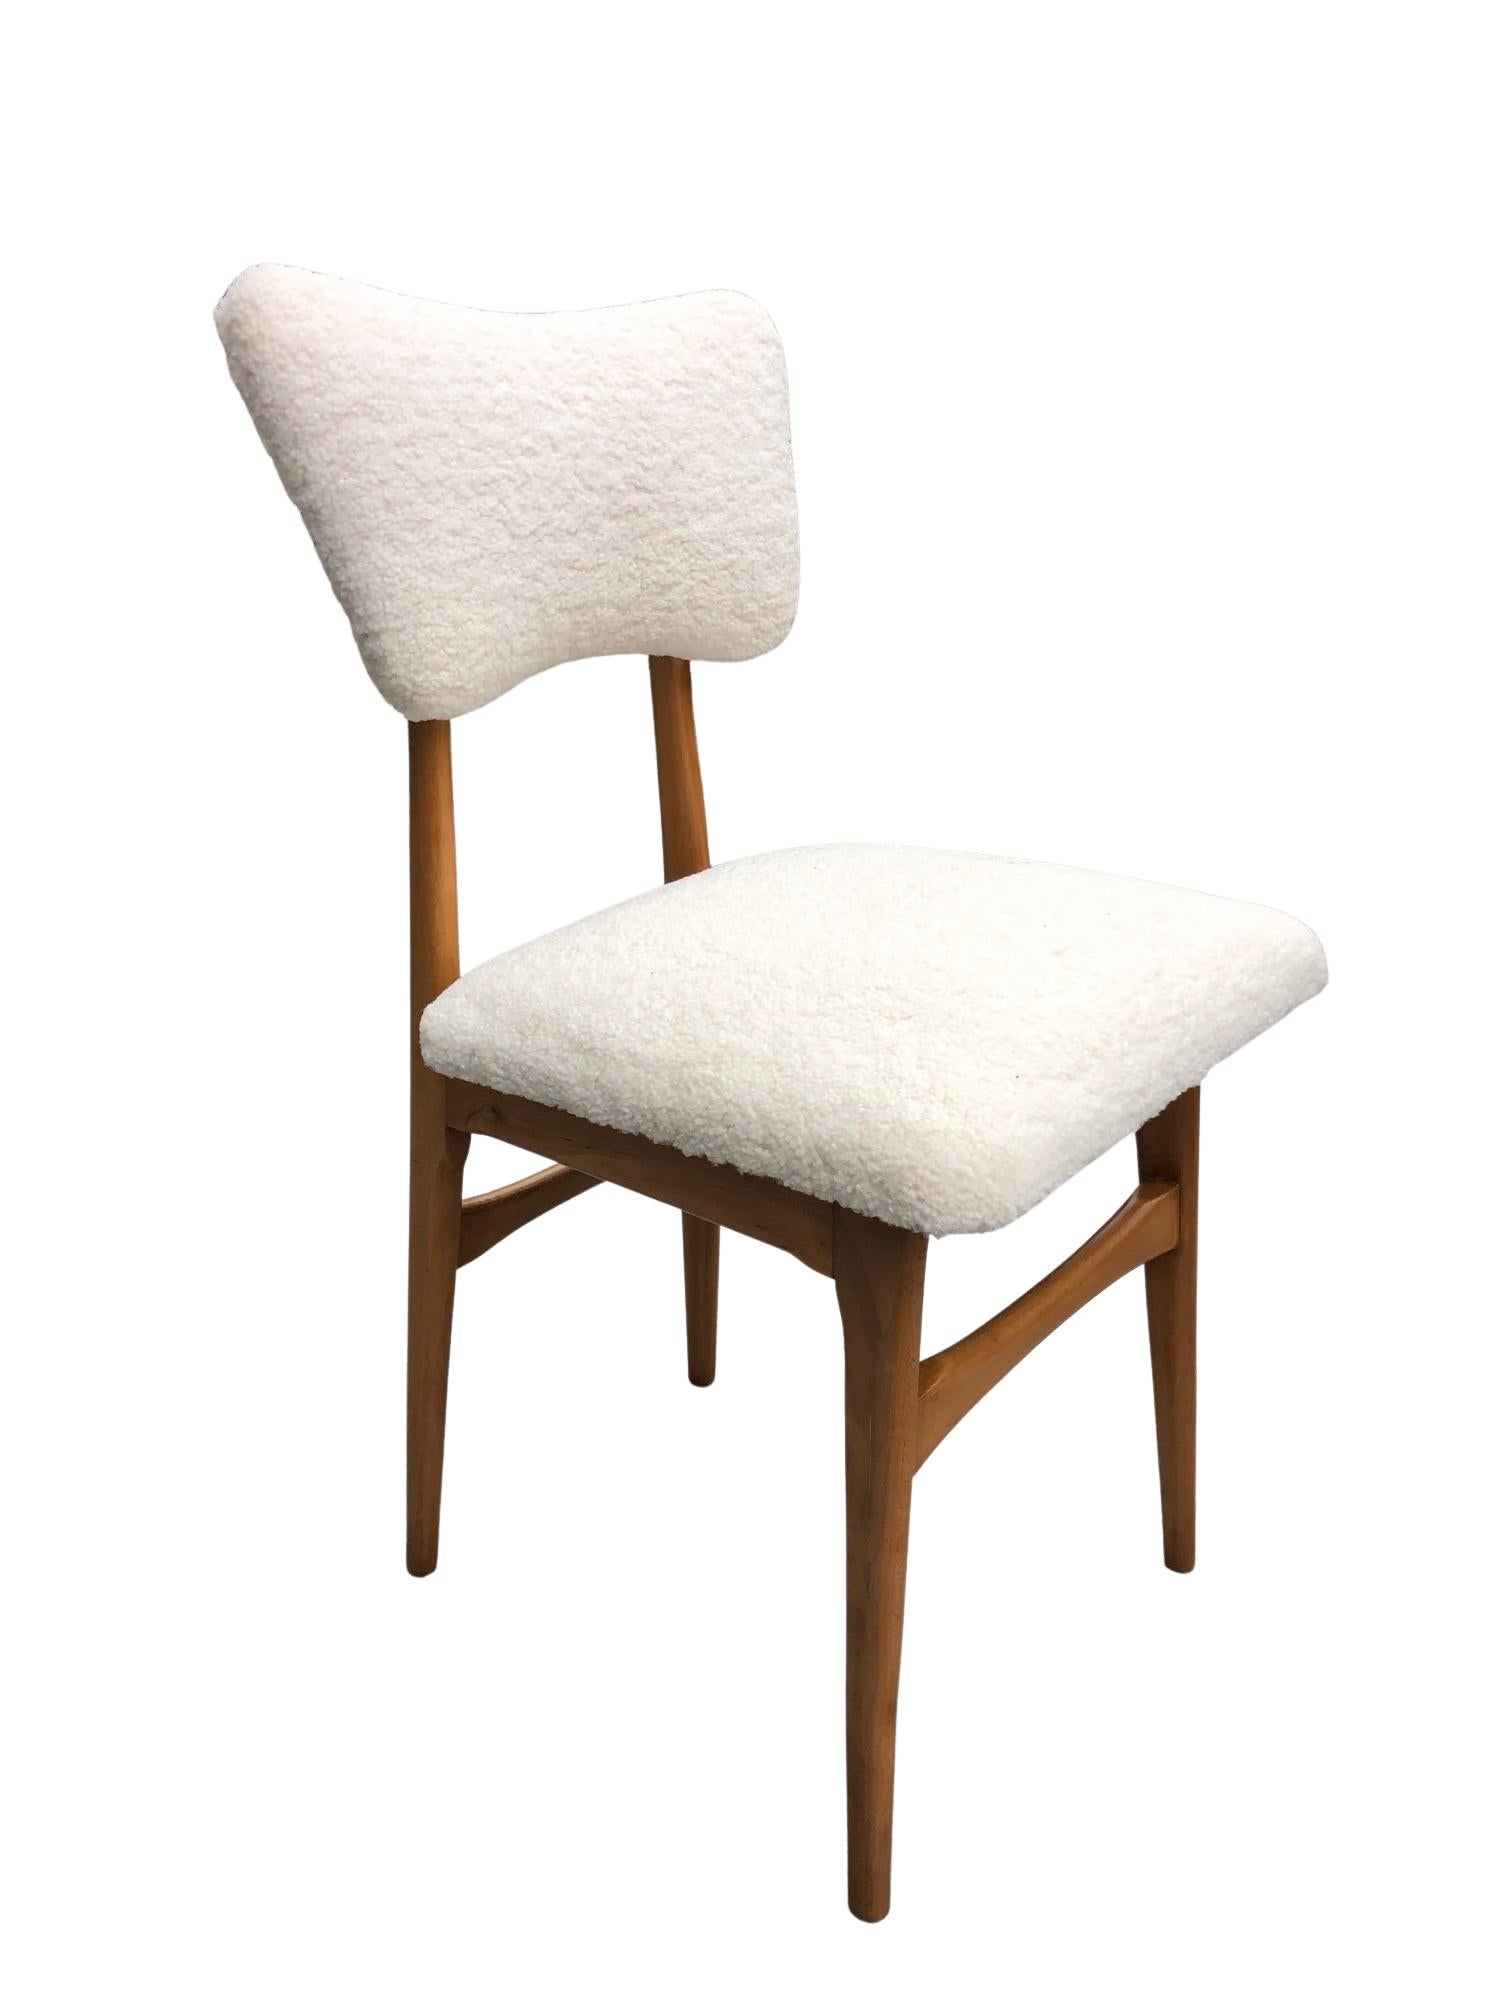 Midcentury Cream Bouclé and Wood Dining Chair, Europe, 1960s For Sale 6